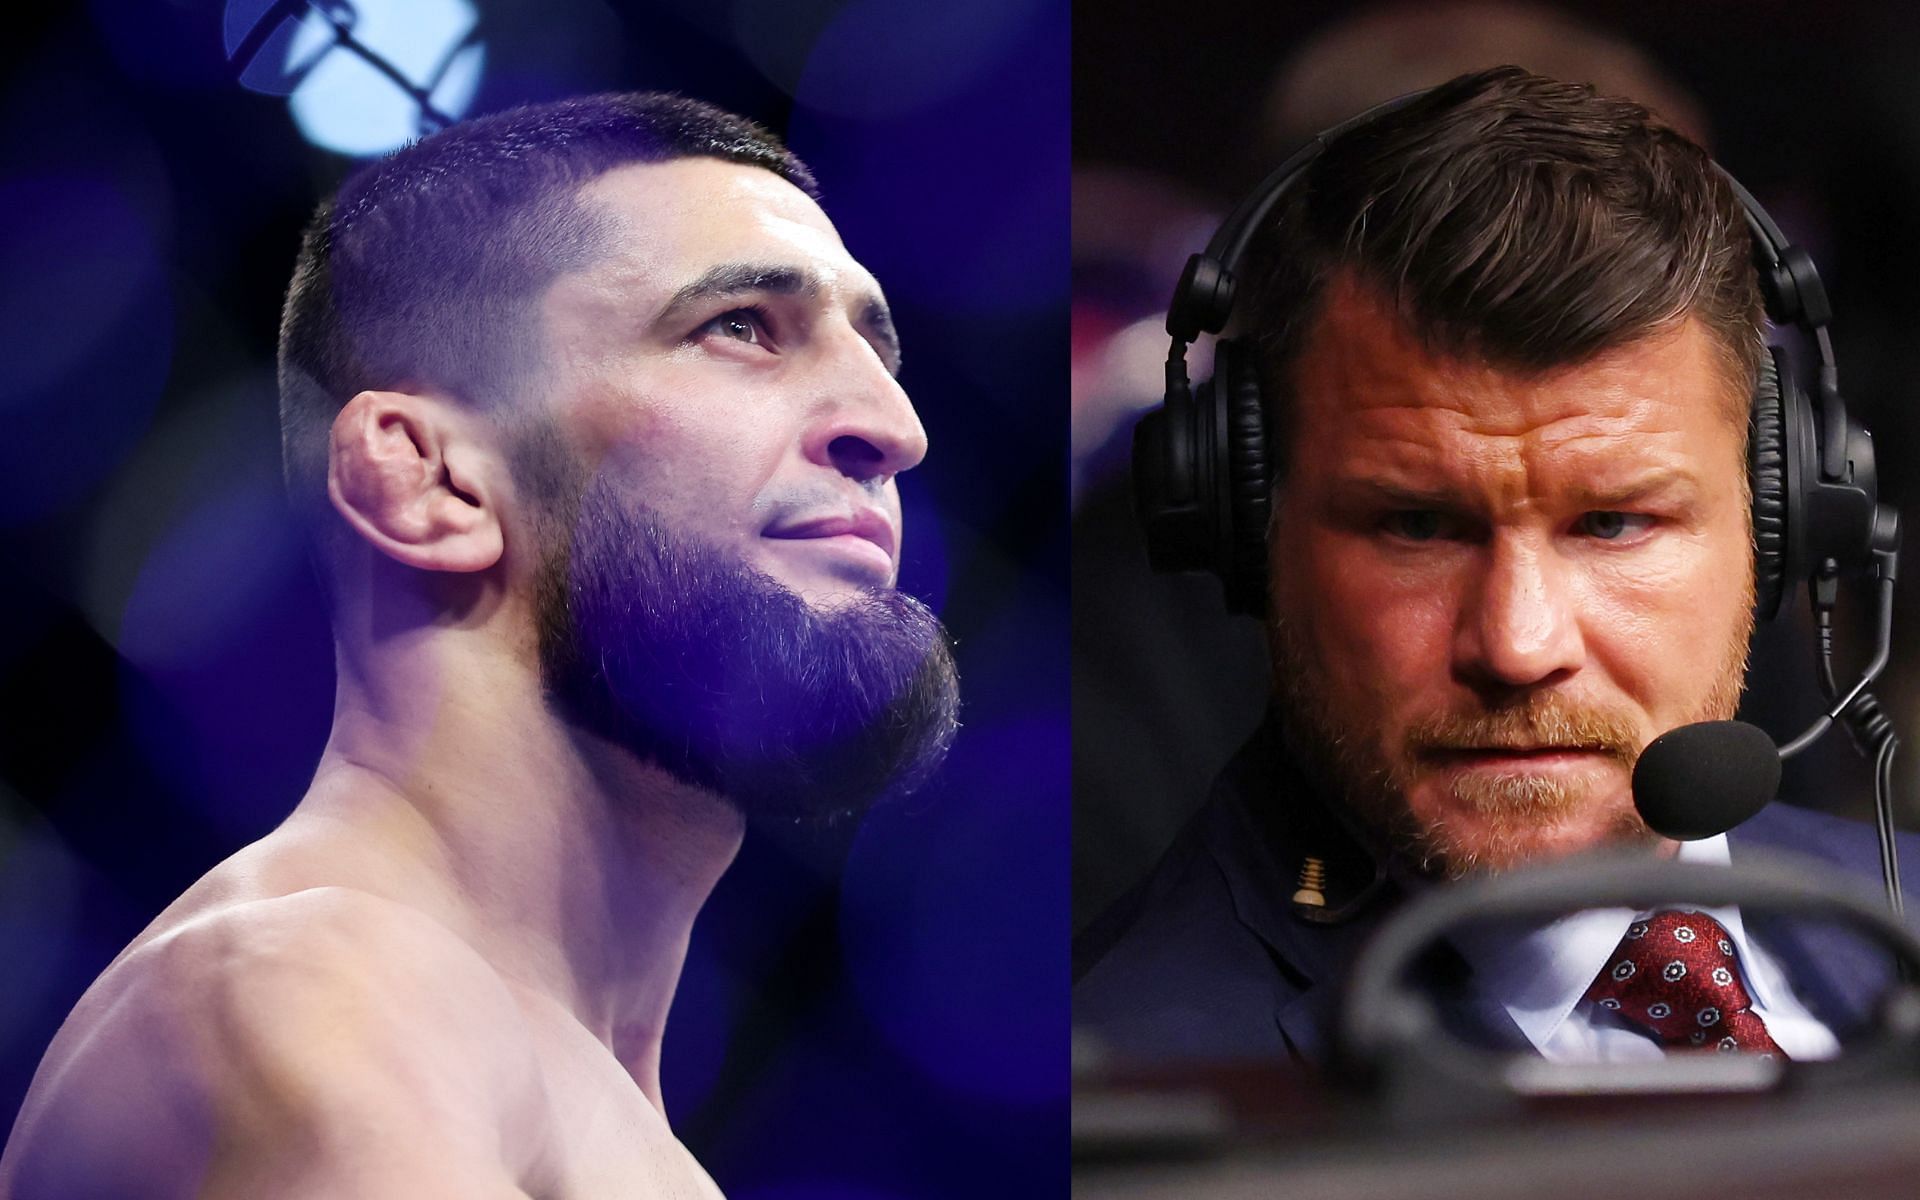 Khamzat Chimaev (left) and Michael Bisping (right). [Images courtesy: both images via Getty Images]